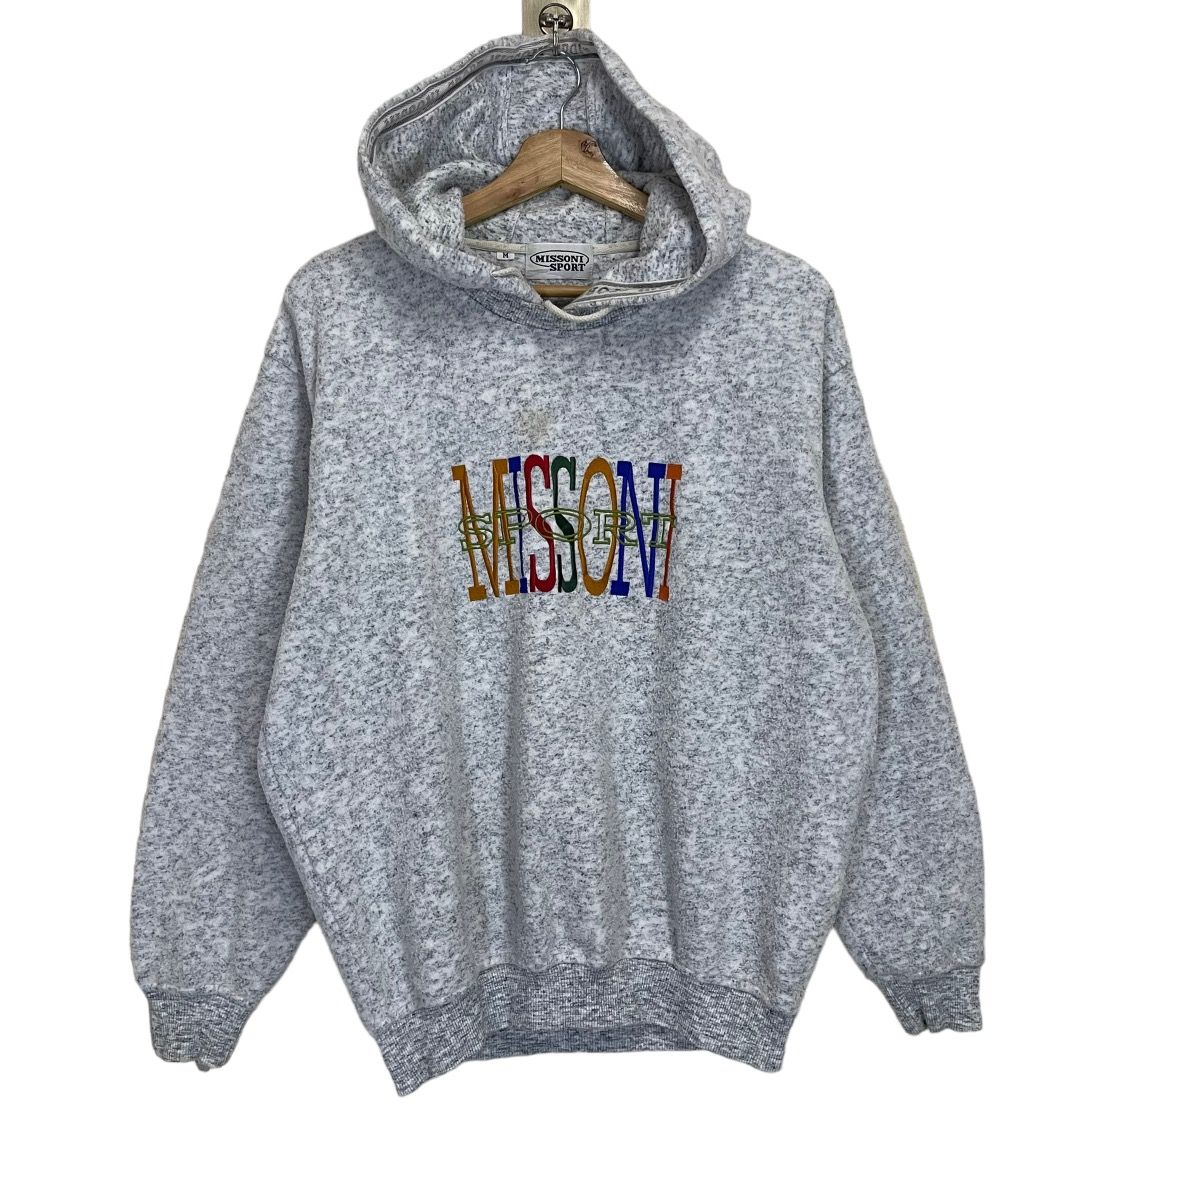 Vintage Missoni Sports Multicolour Spellout Pullover Hoodie - 1